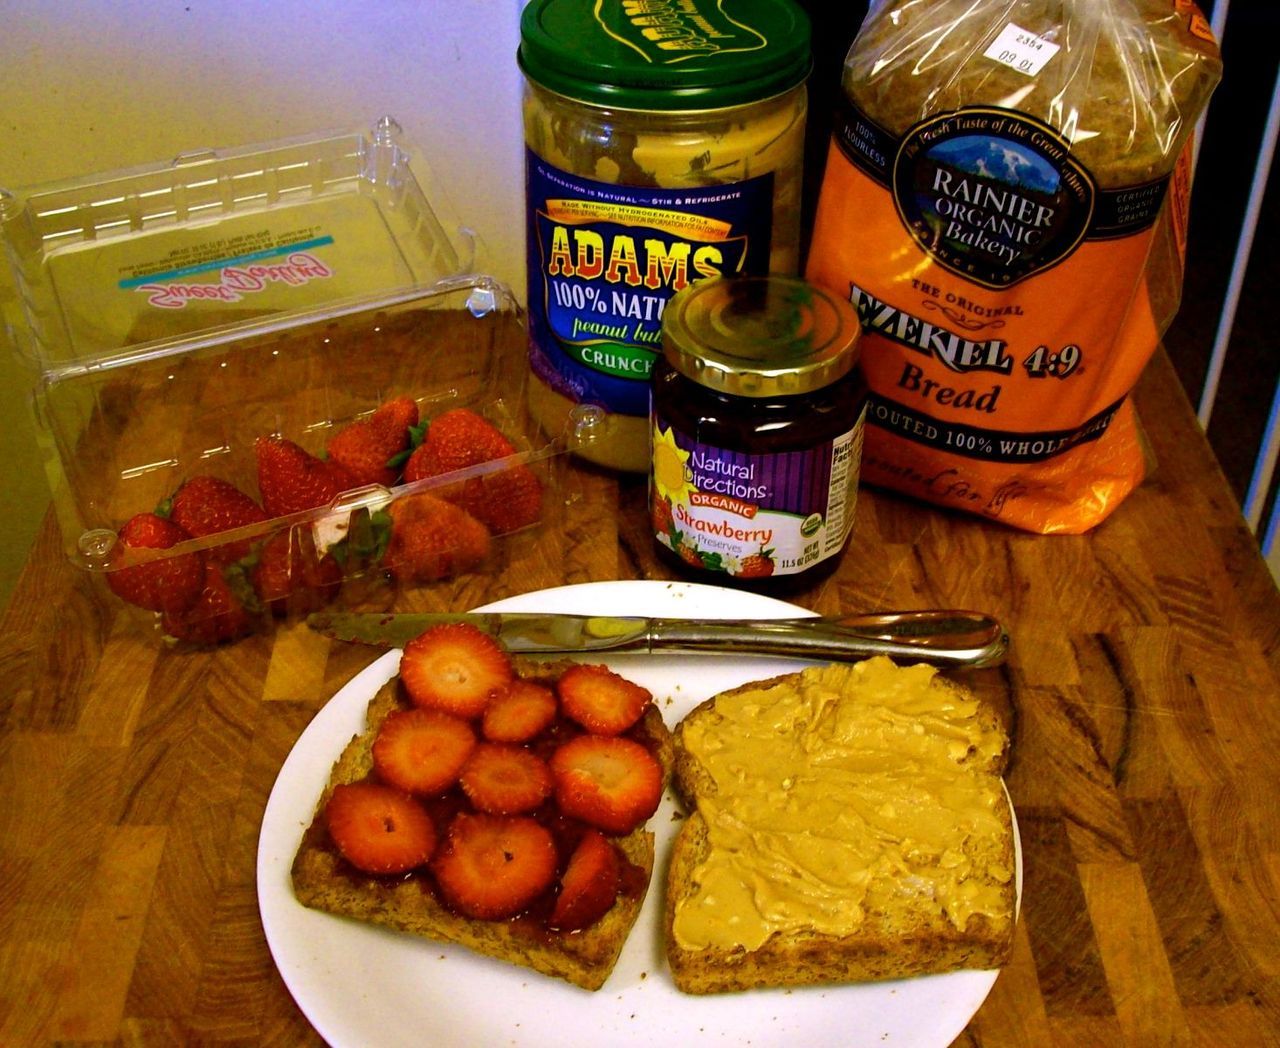 fitness-ginger:
“Best post-workout sandwich ever.
Well, maybe second to peanut butter and banana, but still awesome.
”